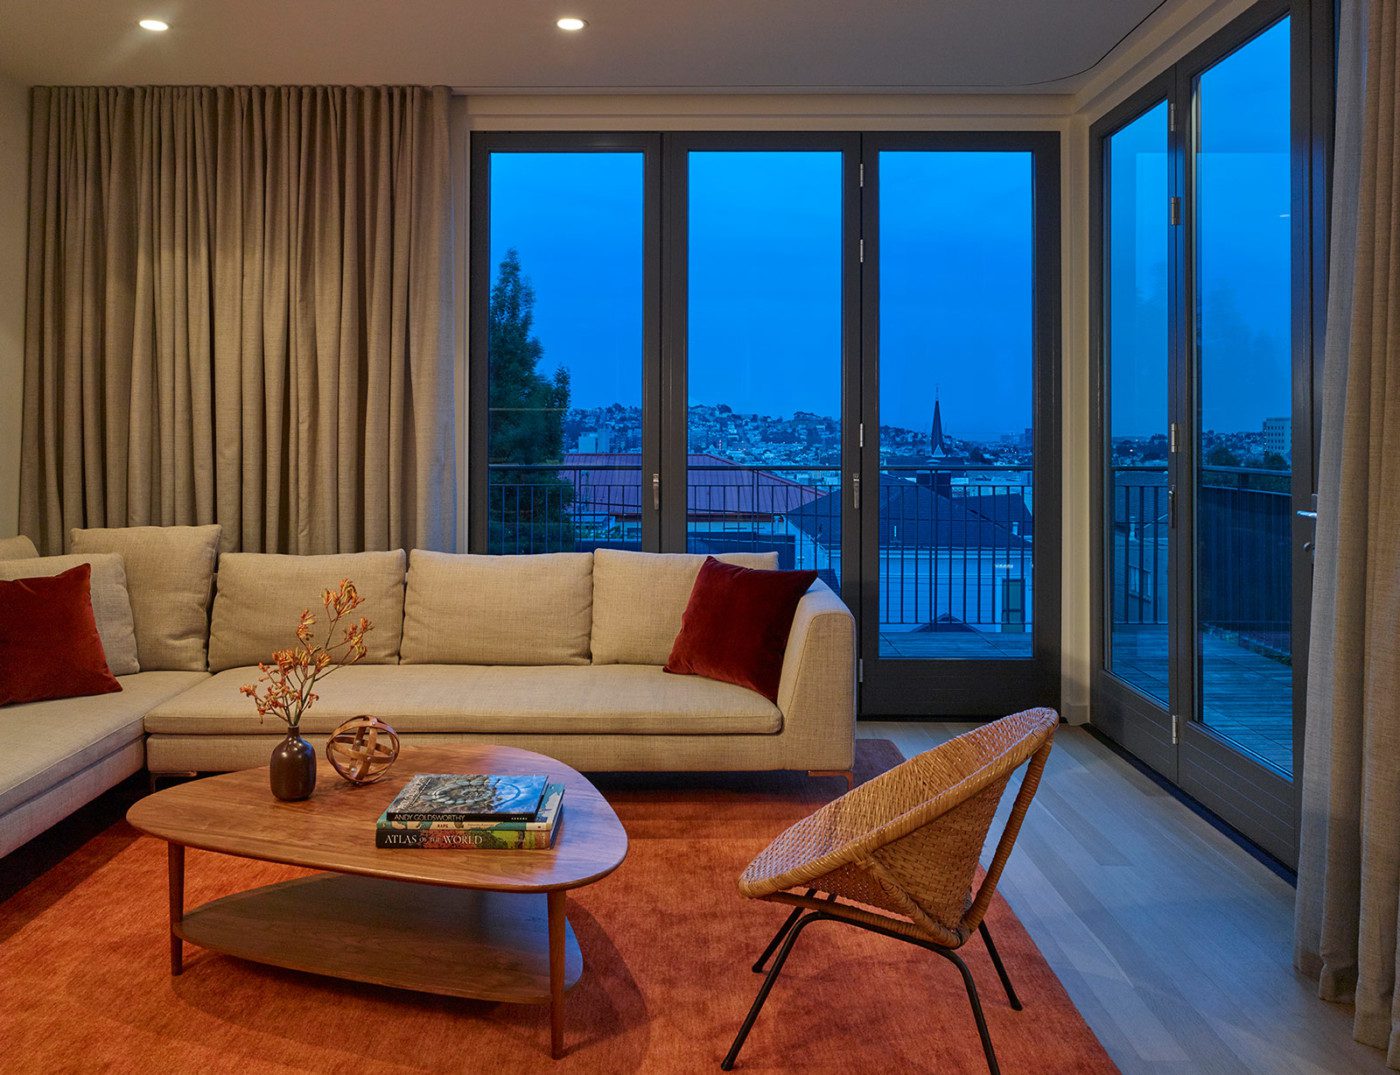 modern living room at dusk with view of san francisco